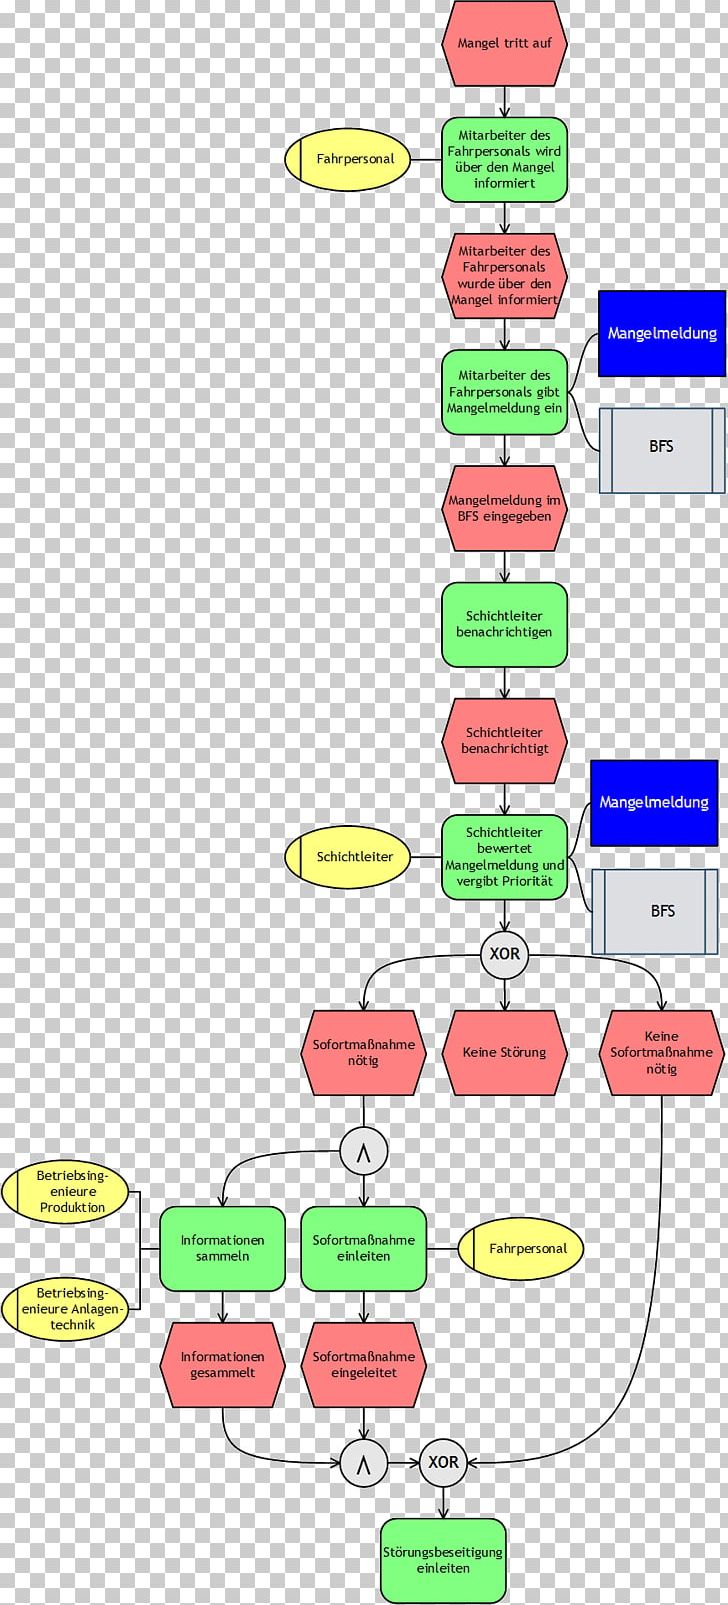 Event-driven Process Chain Business Process Model And Notation Business Process Management Architecture Of Integrated Information Systems PNG, Clipart, Area, Business Process, Business Process Management, Business Process Modeling, Computer Software Free PNG Download